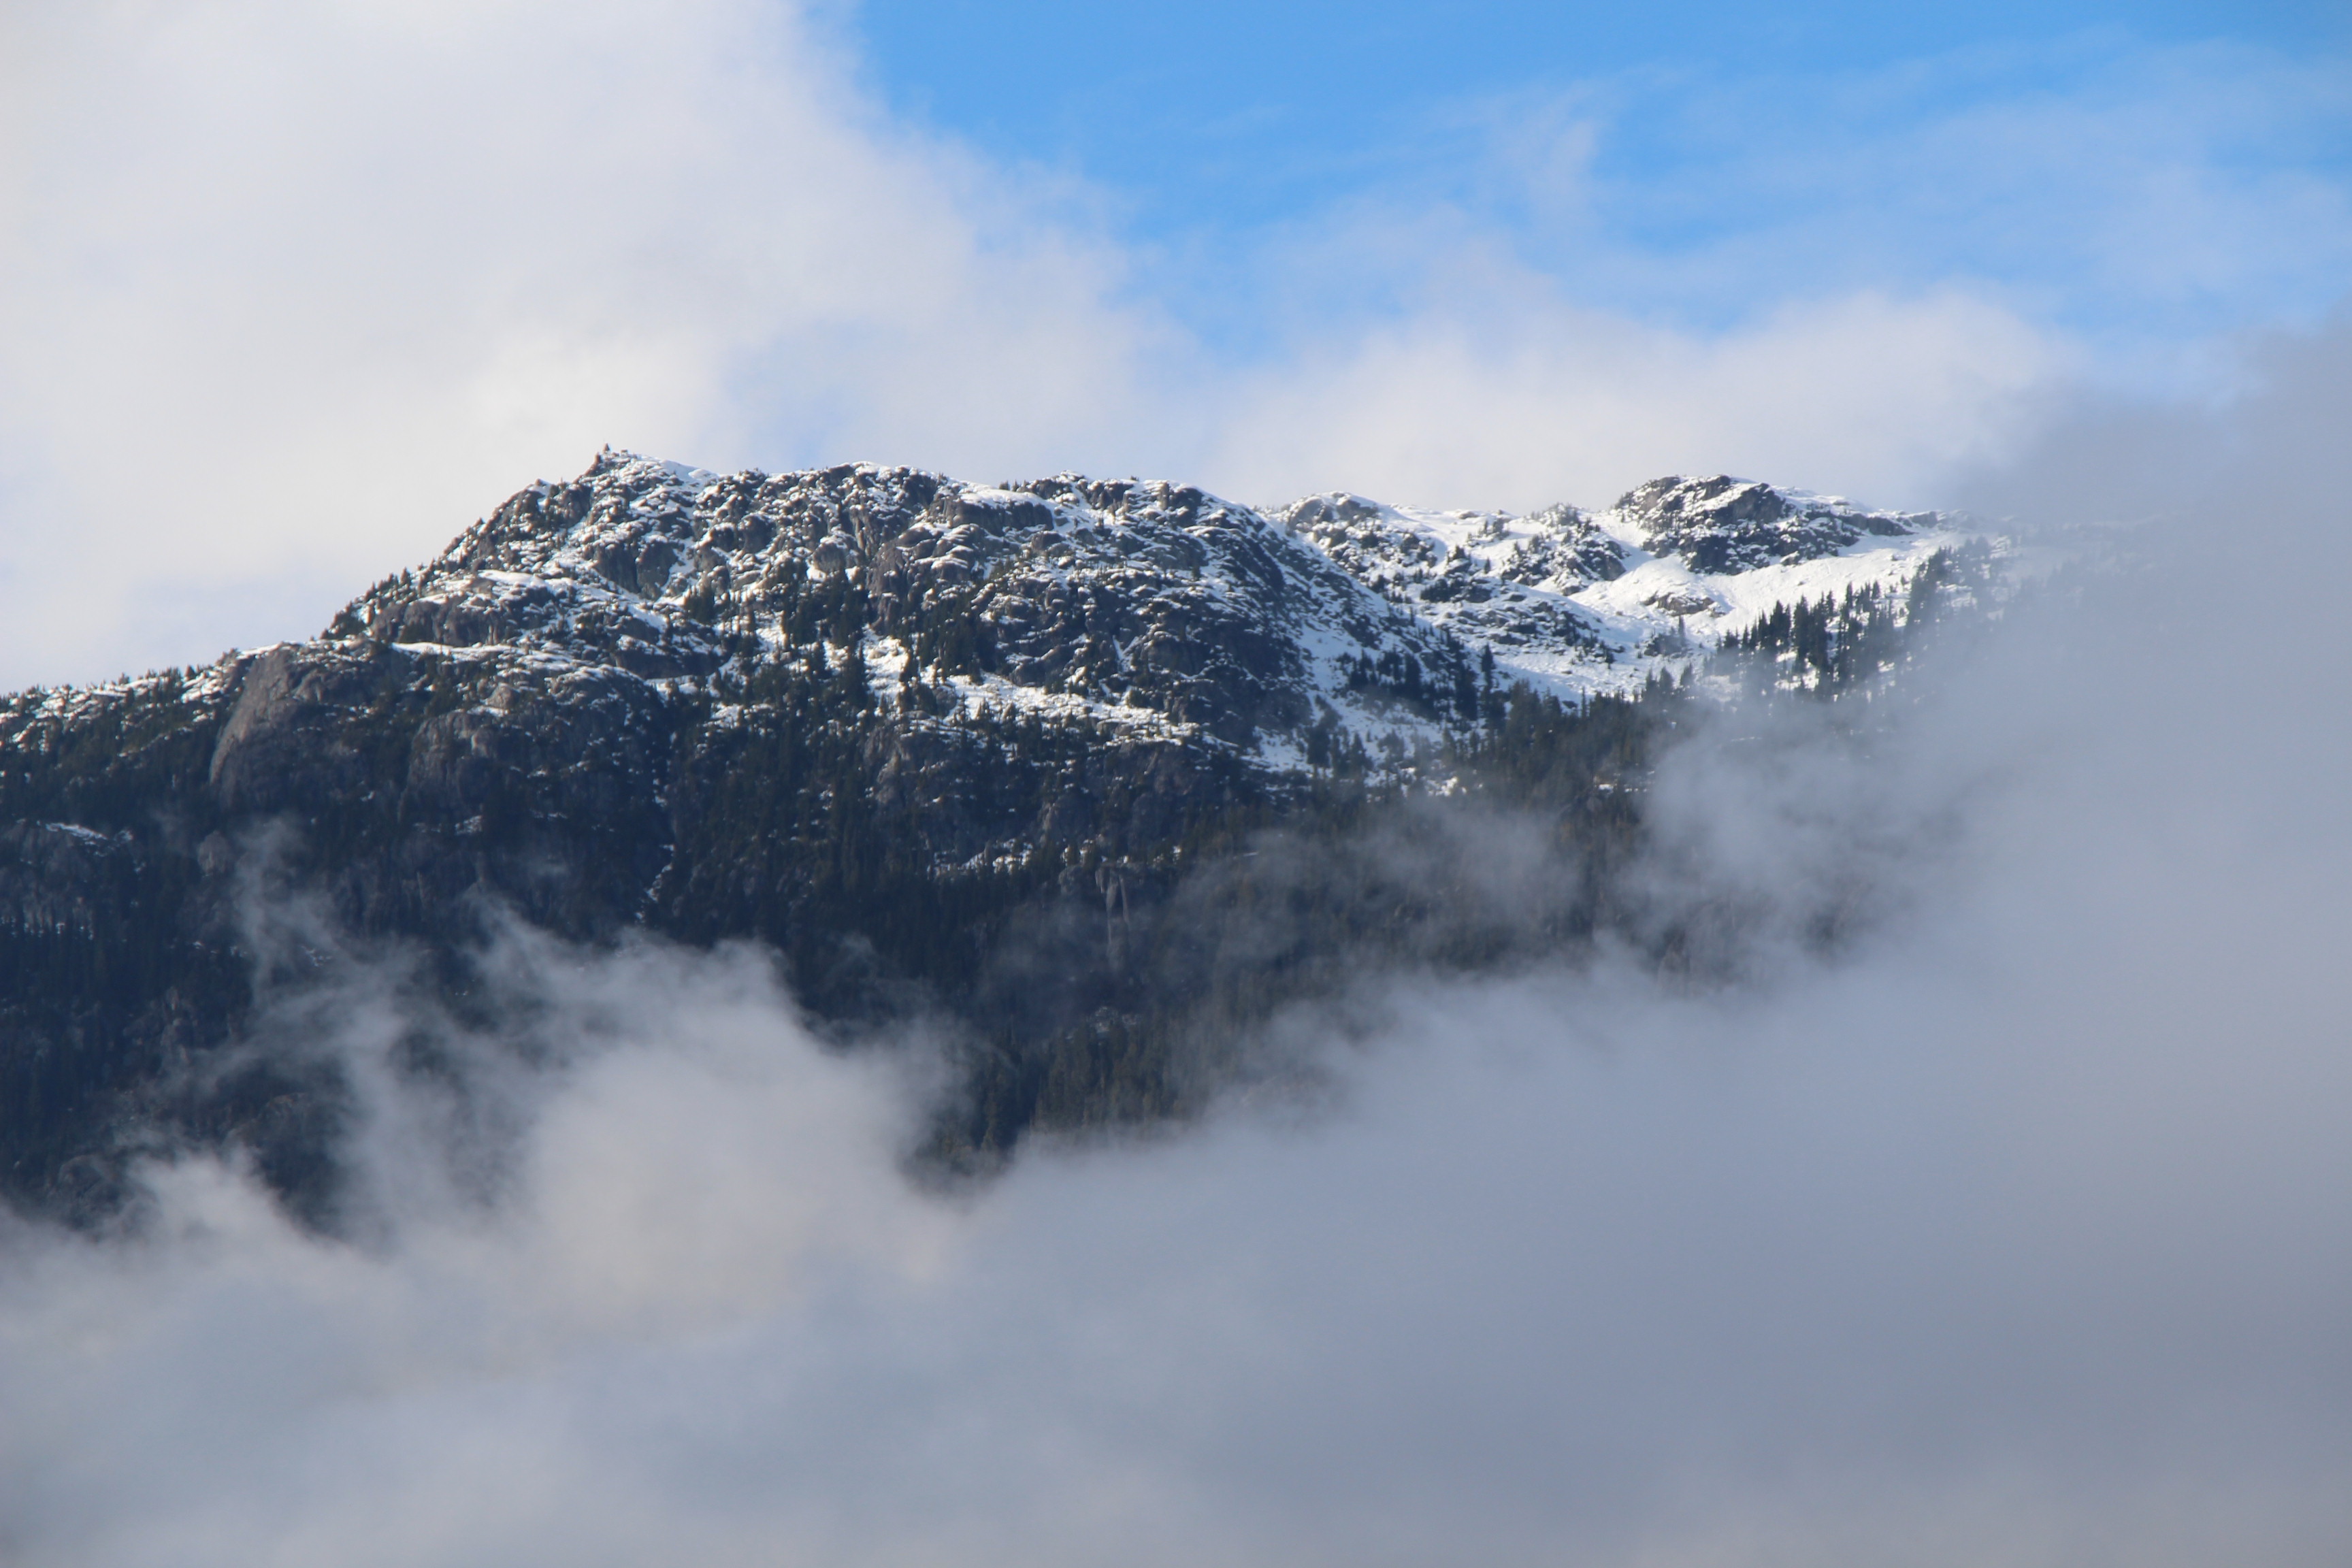 A high mountain peak wreathed in fog.